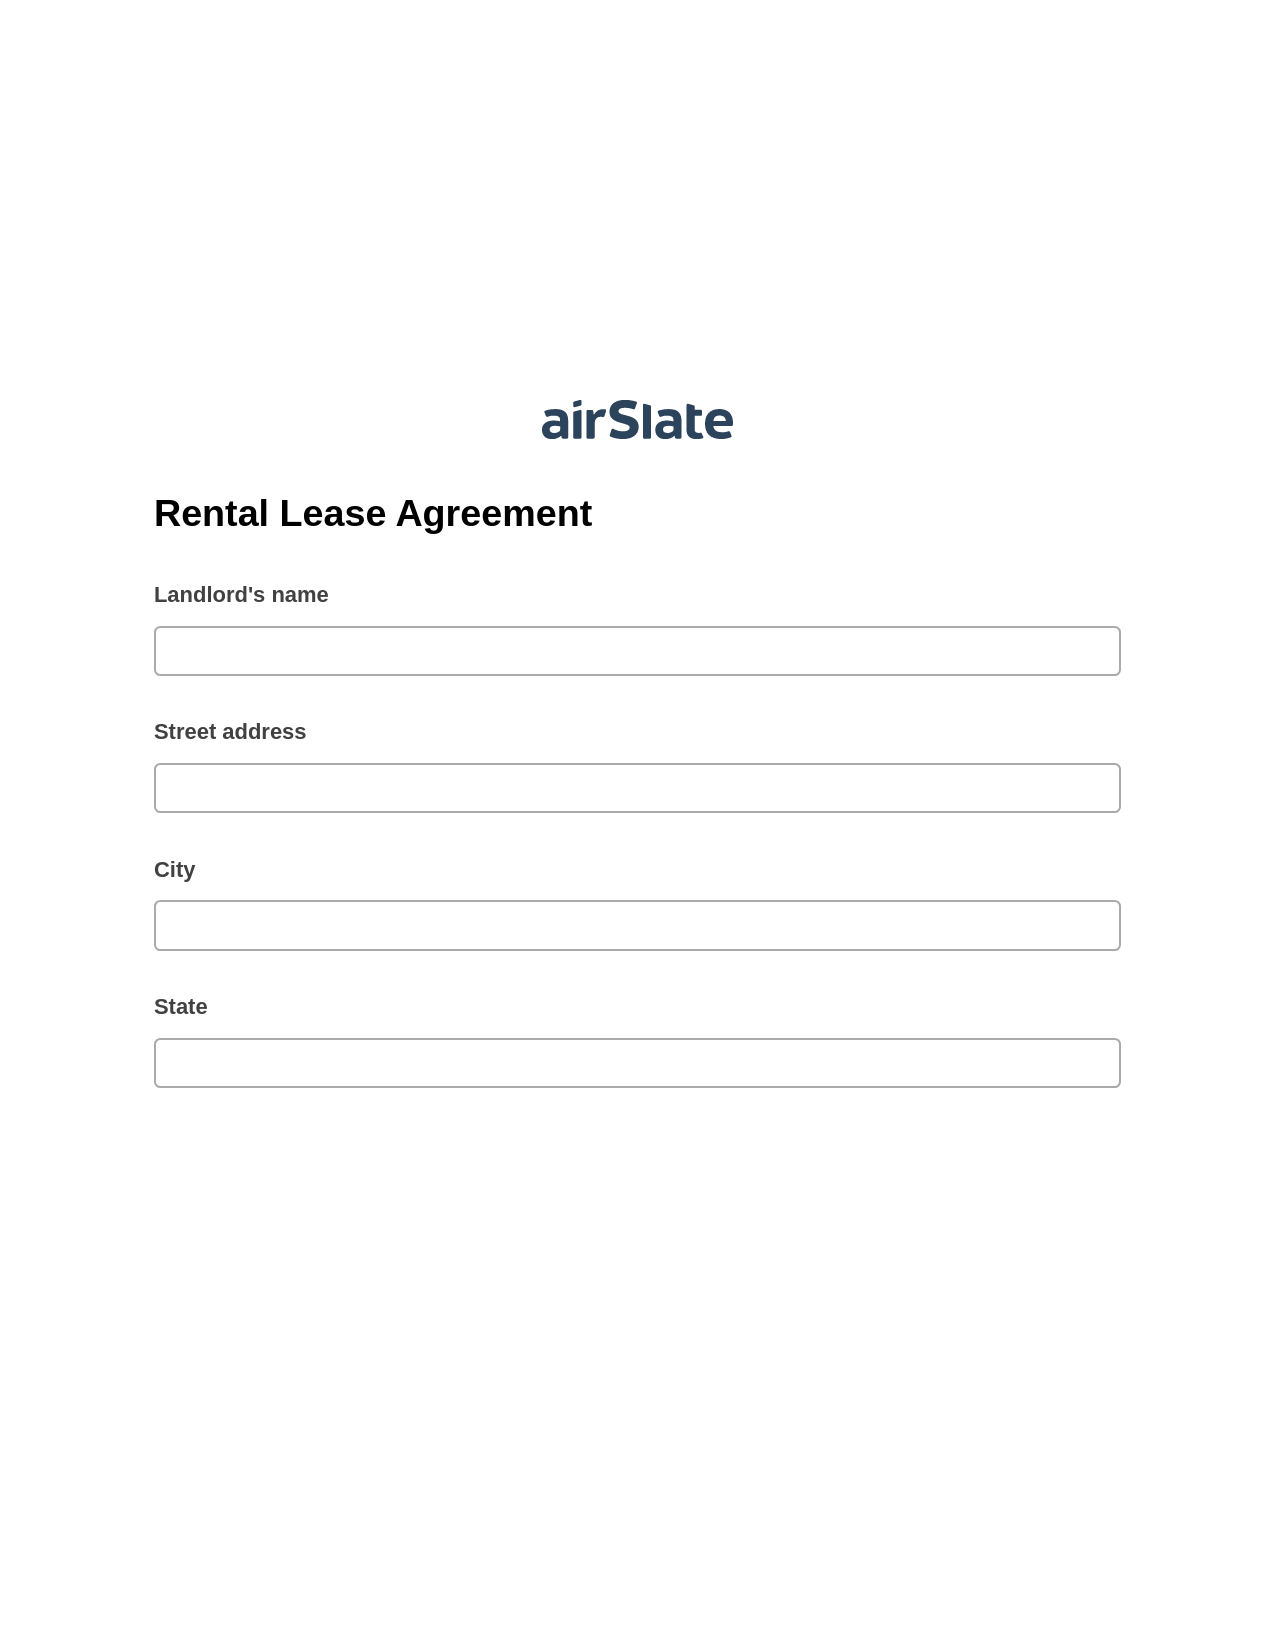 Rental Lease Agreement Pre-fill from another Slate Bot, Pre-fill with Custom Data Bot, Export to Formstack Documents Bot